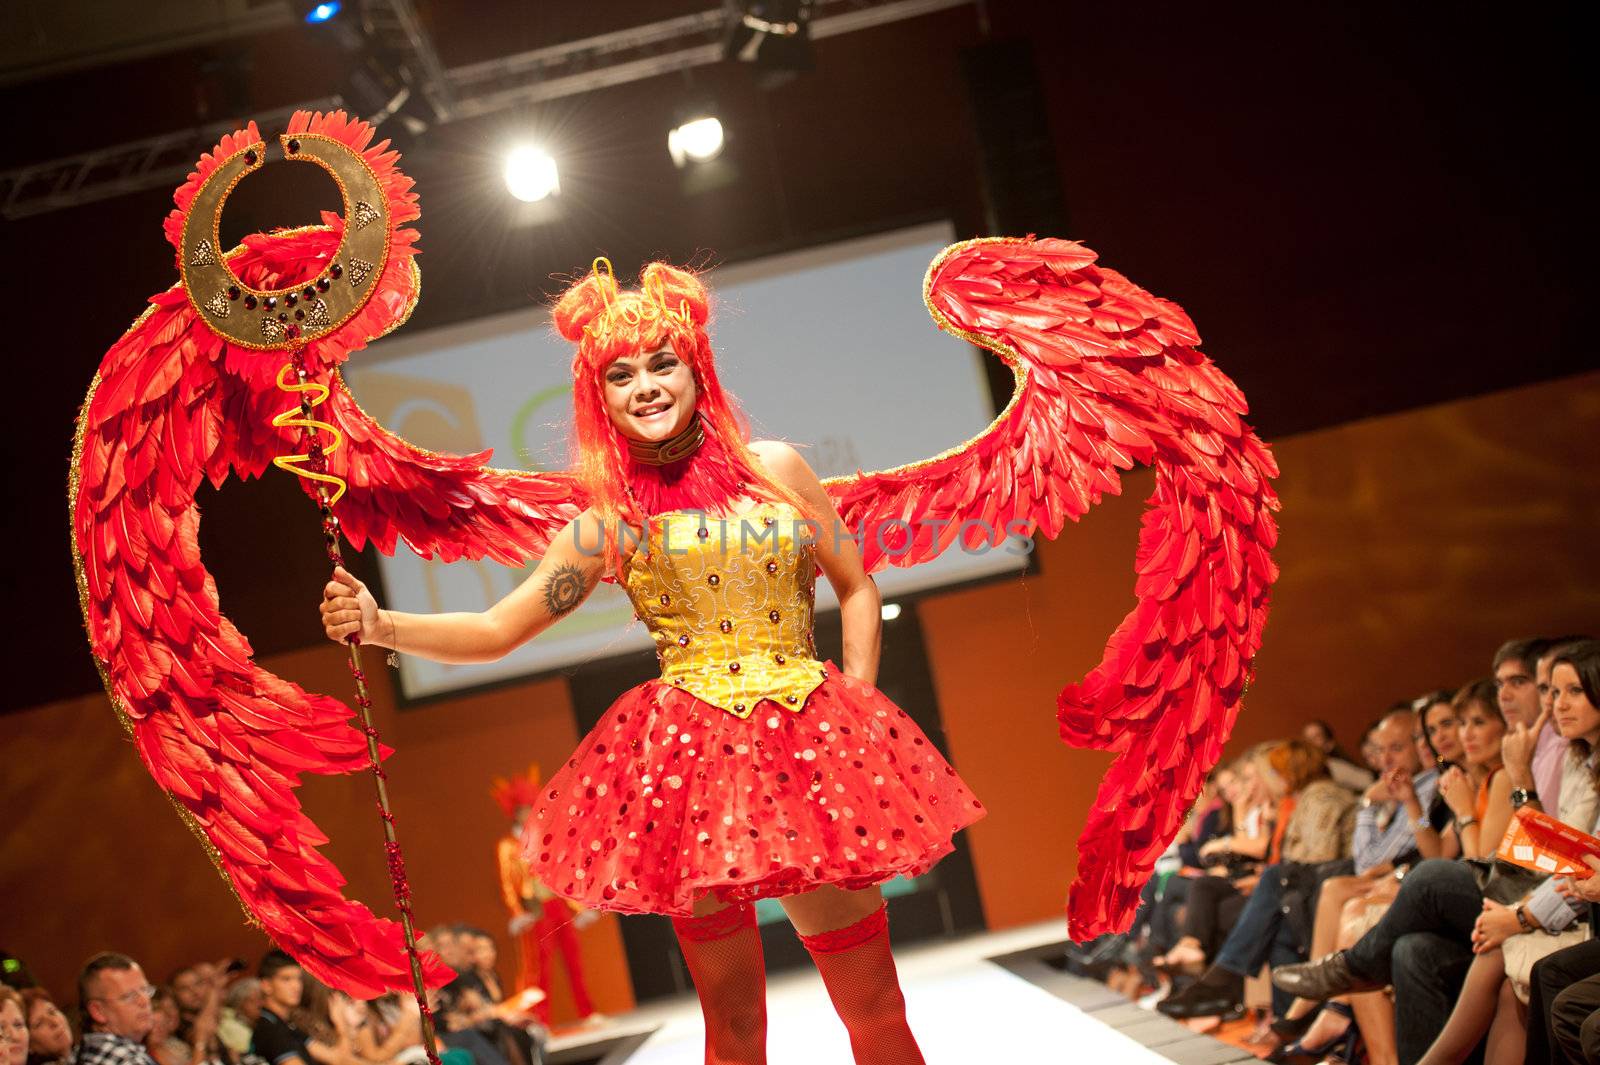 CANARY ISLANDS - 29 OCTOBER: Model on the catwalk wearing carnival costume from designer GC DC during Carnival Fashion Week October 29, 2011 in Canary Islands, Spain